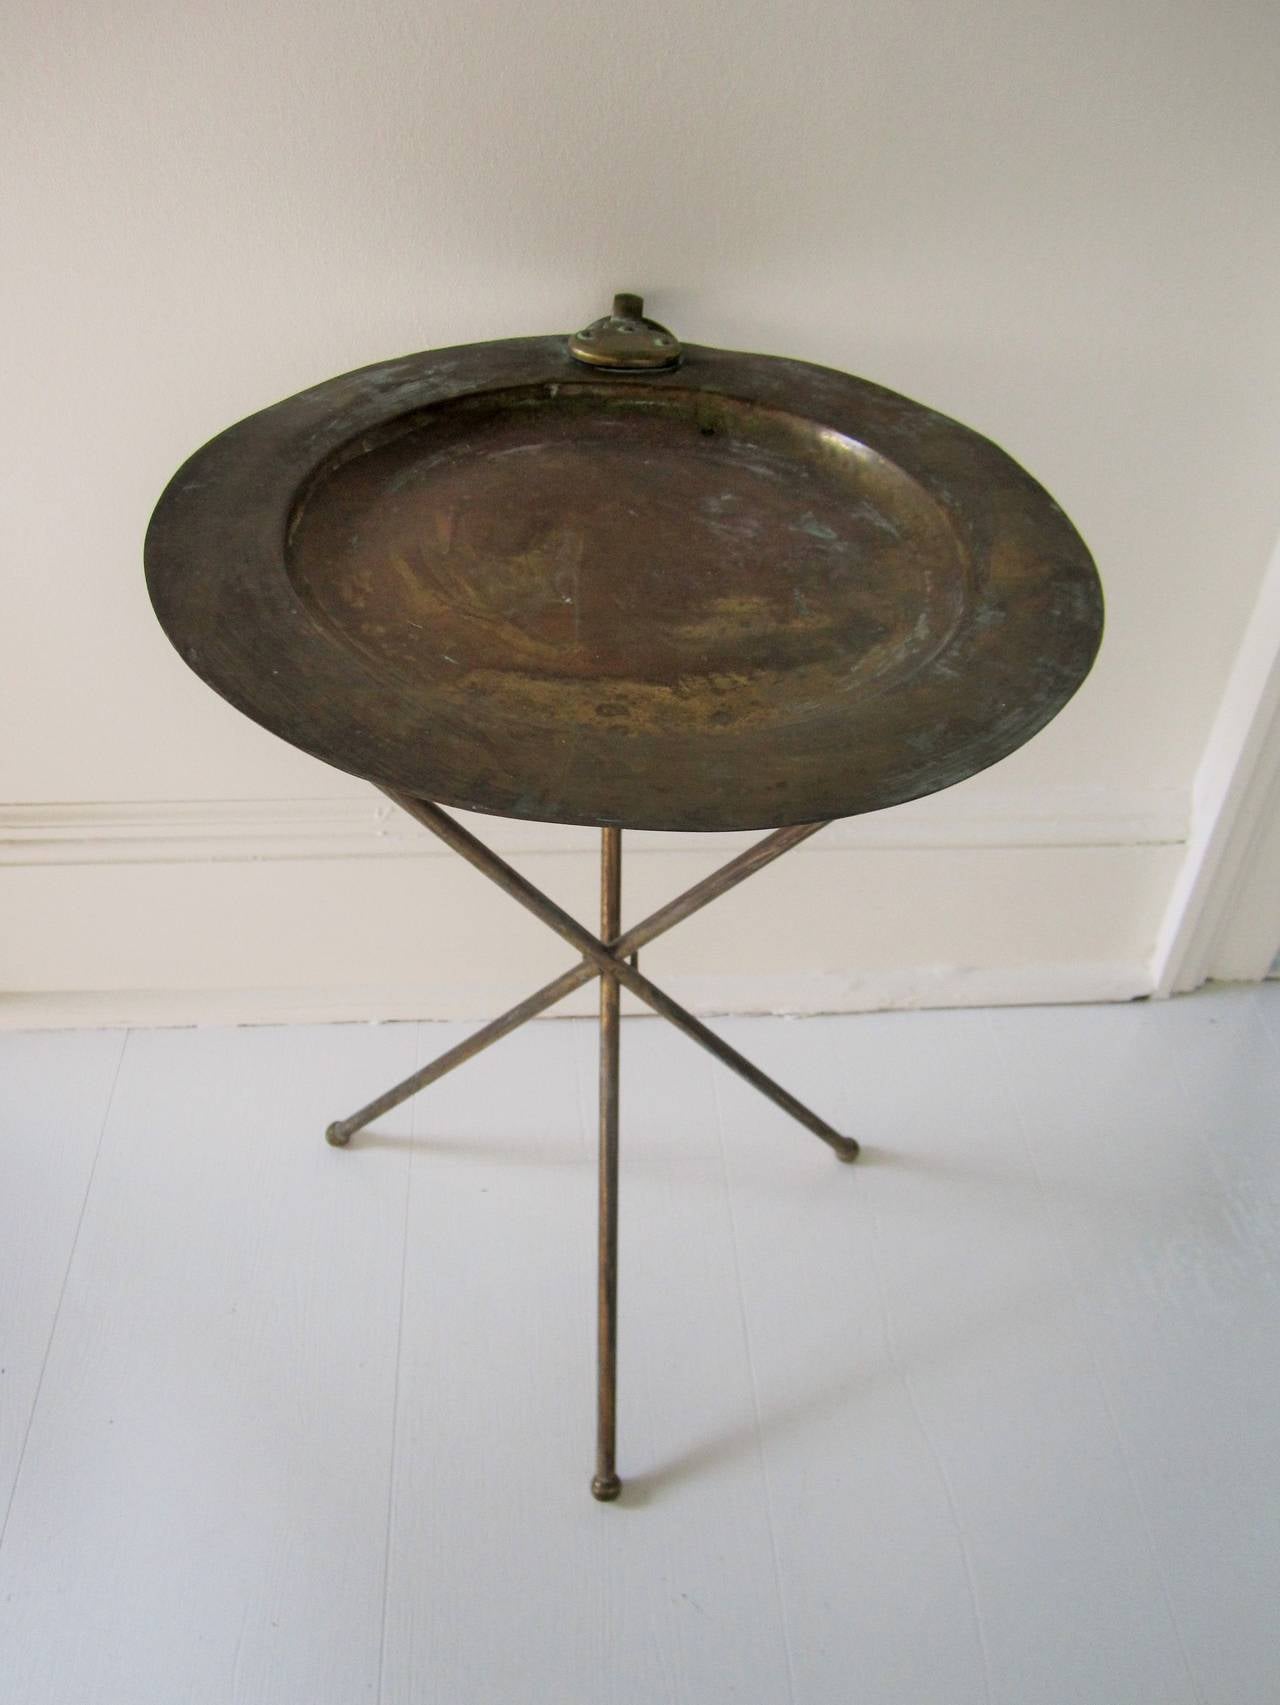 A chic vintage Italian brass folding tripod side table with 'ring' detail in the style of Valenti. Item available here online. By request, item can be made available by appointment to the Trade (in New York.) 
 